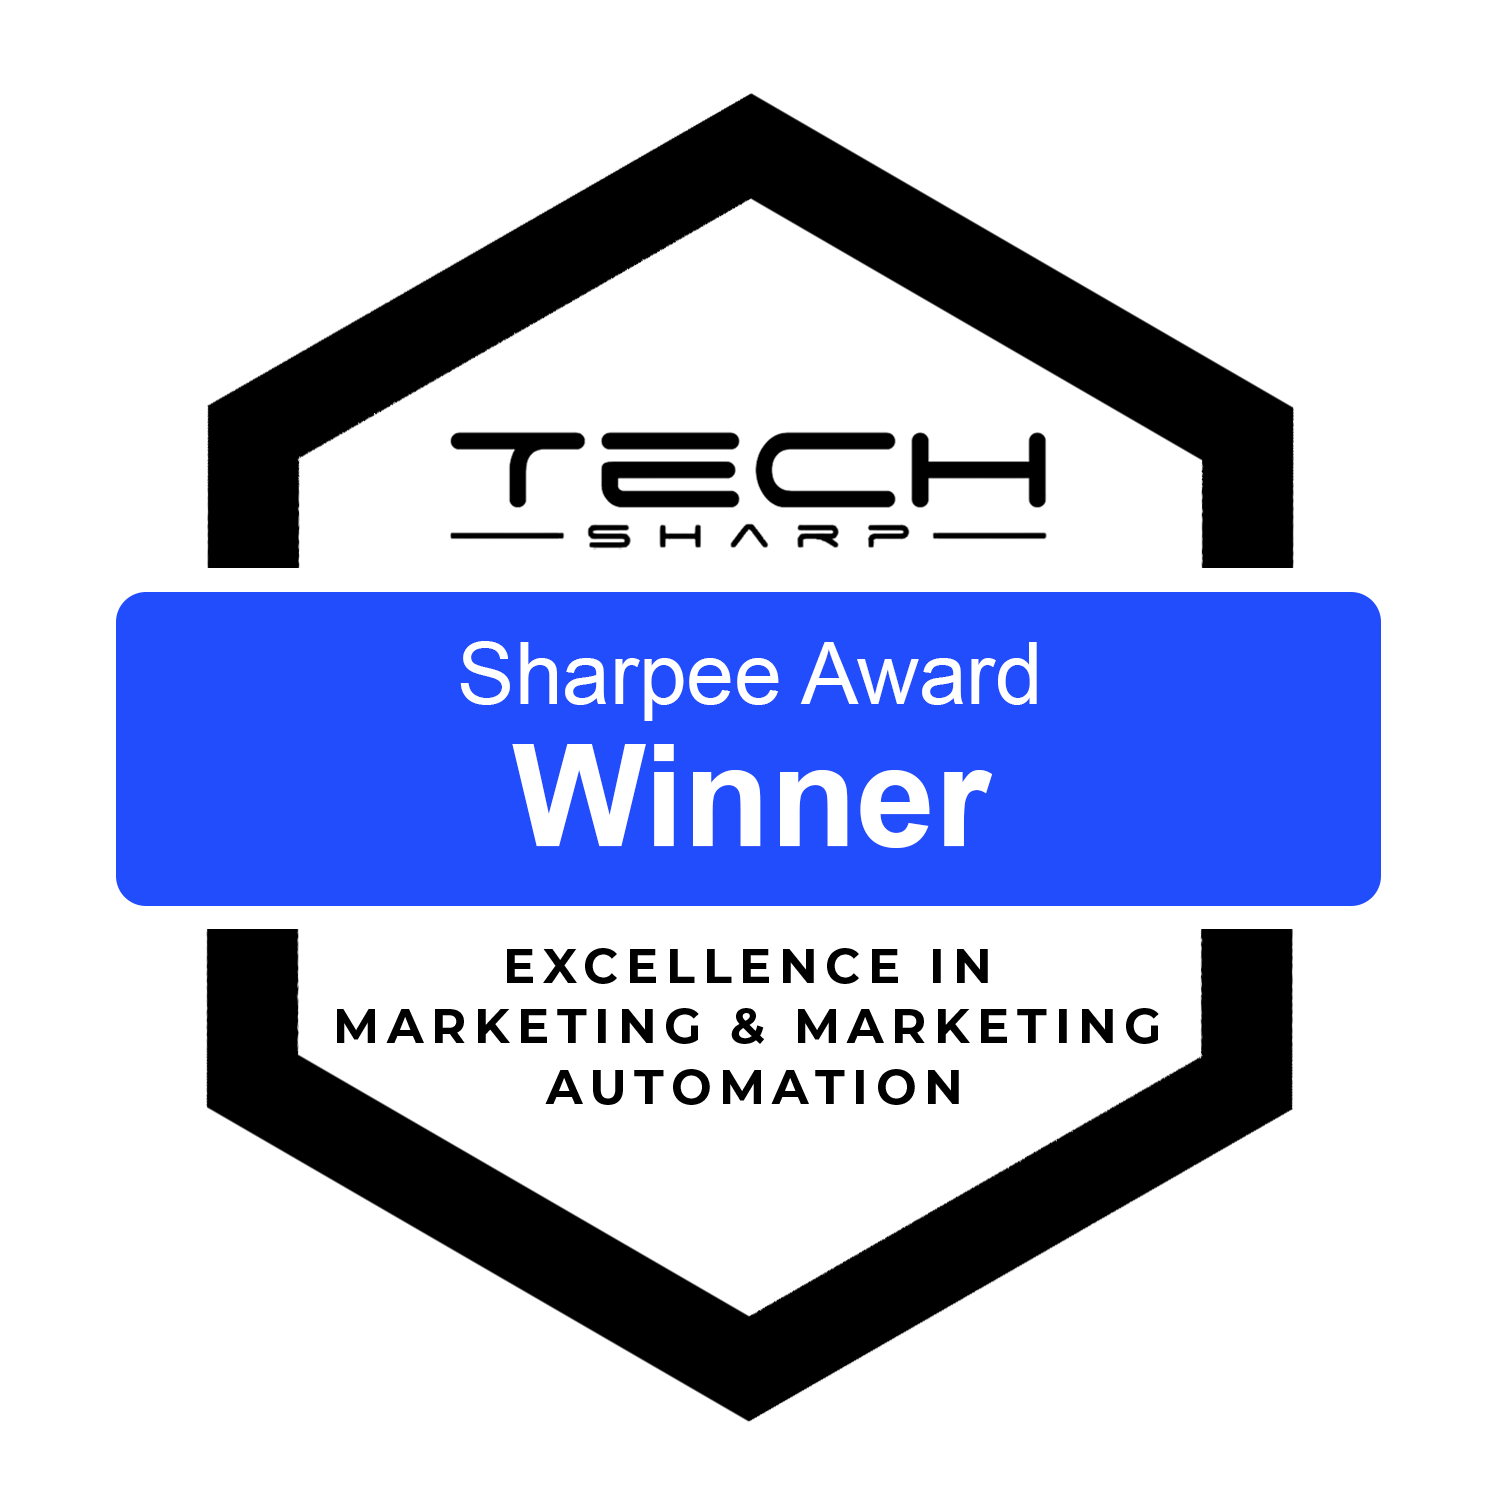 New York, United StatesのエージェンシーCleverman Inc.はSharpee Award for Excellence in Business Process Automation & Marketing賞を獲得しています